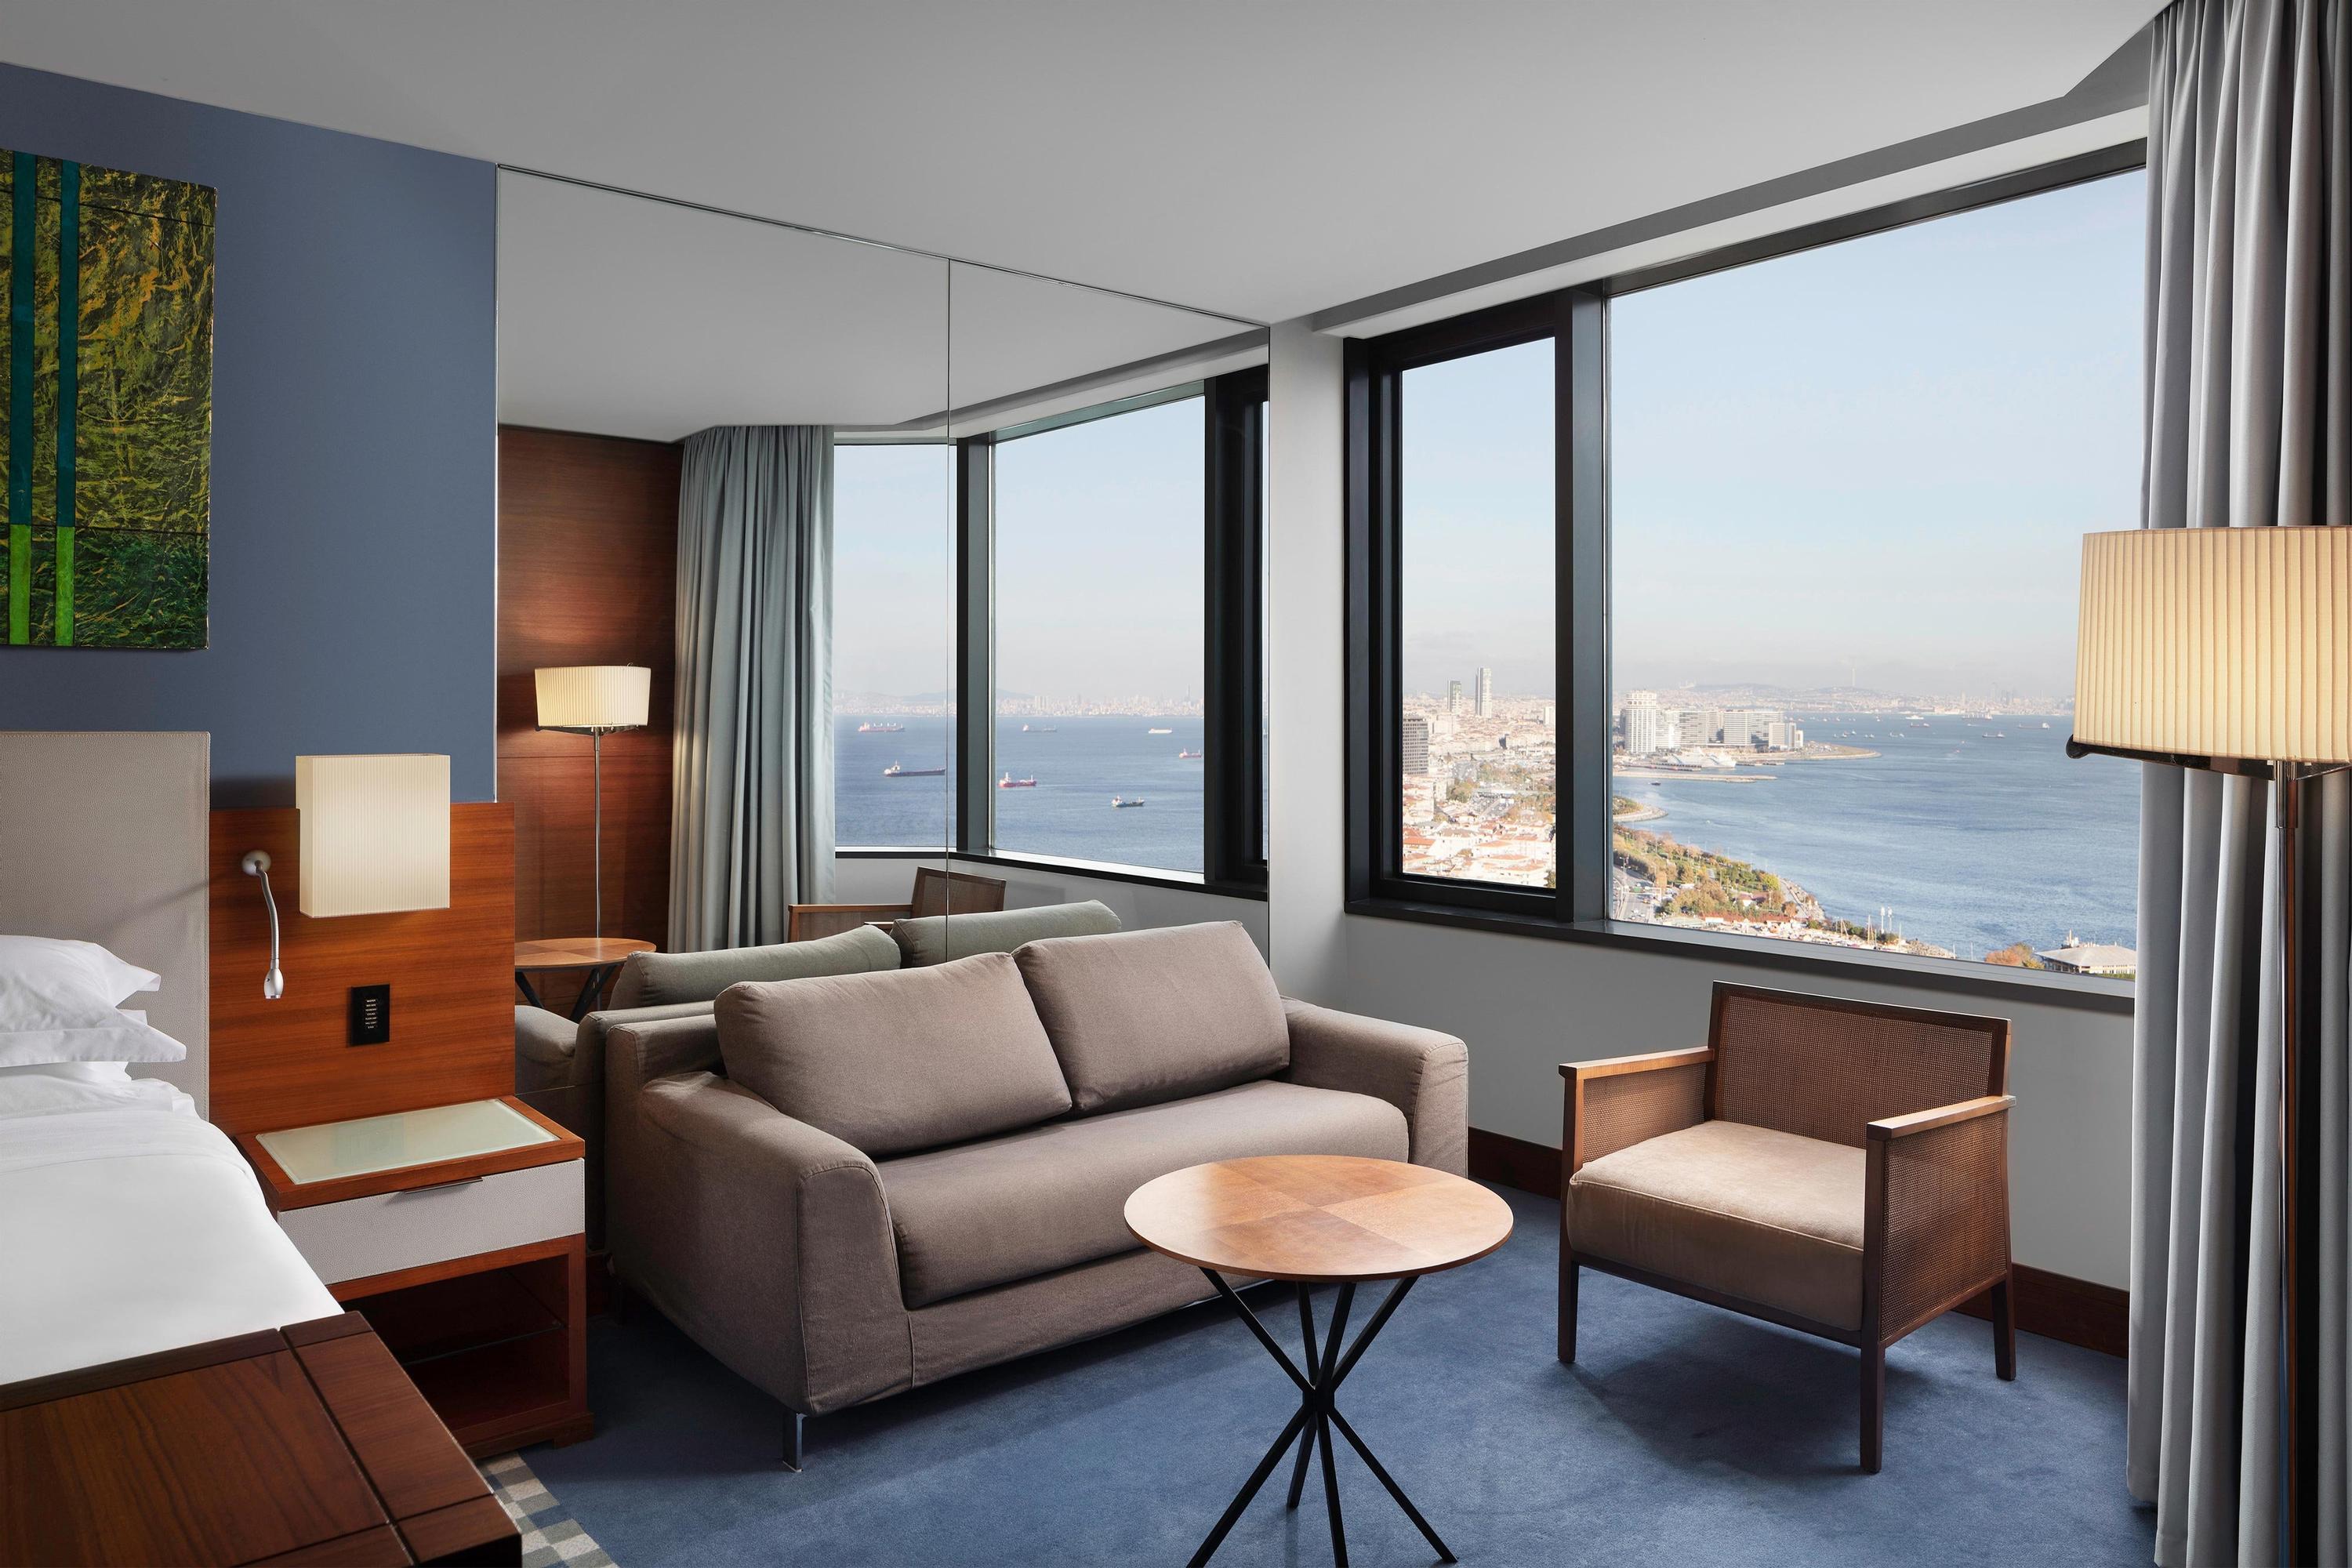 THE 10 CLOSEST Hotels to Louis Vuitton, Istanbul